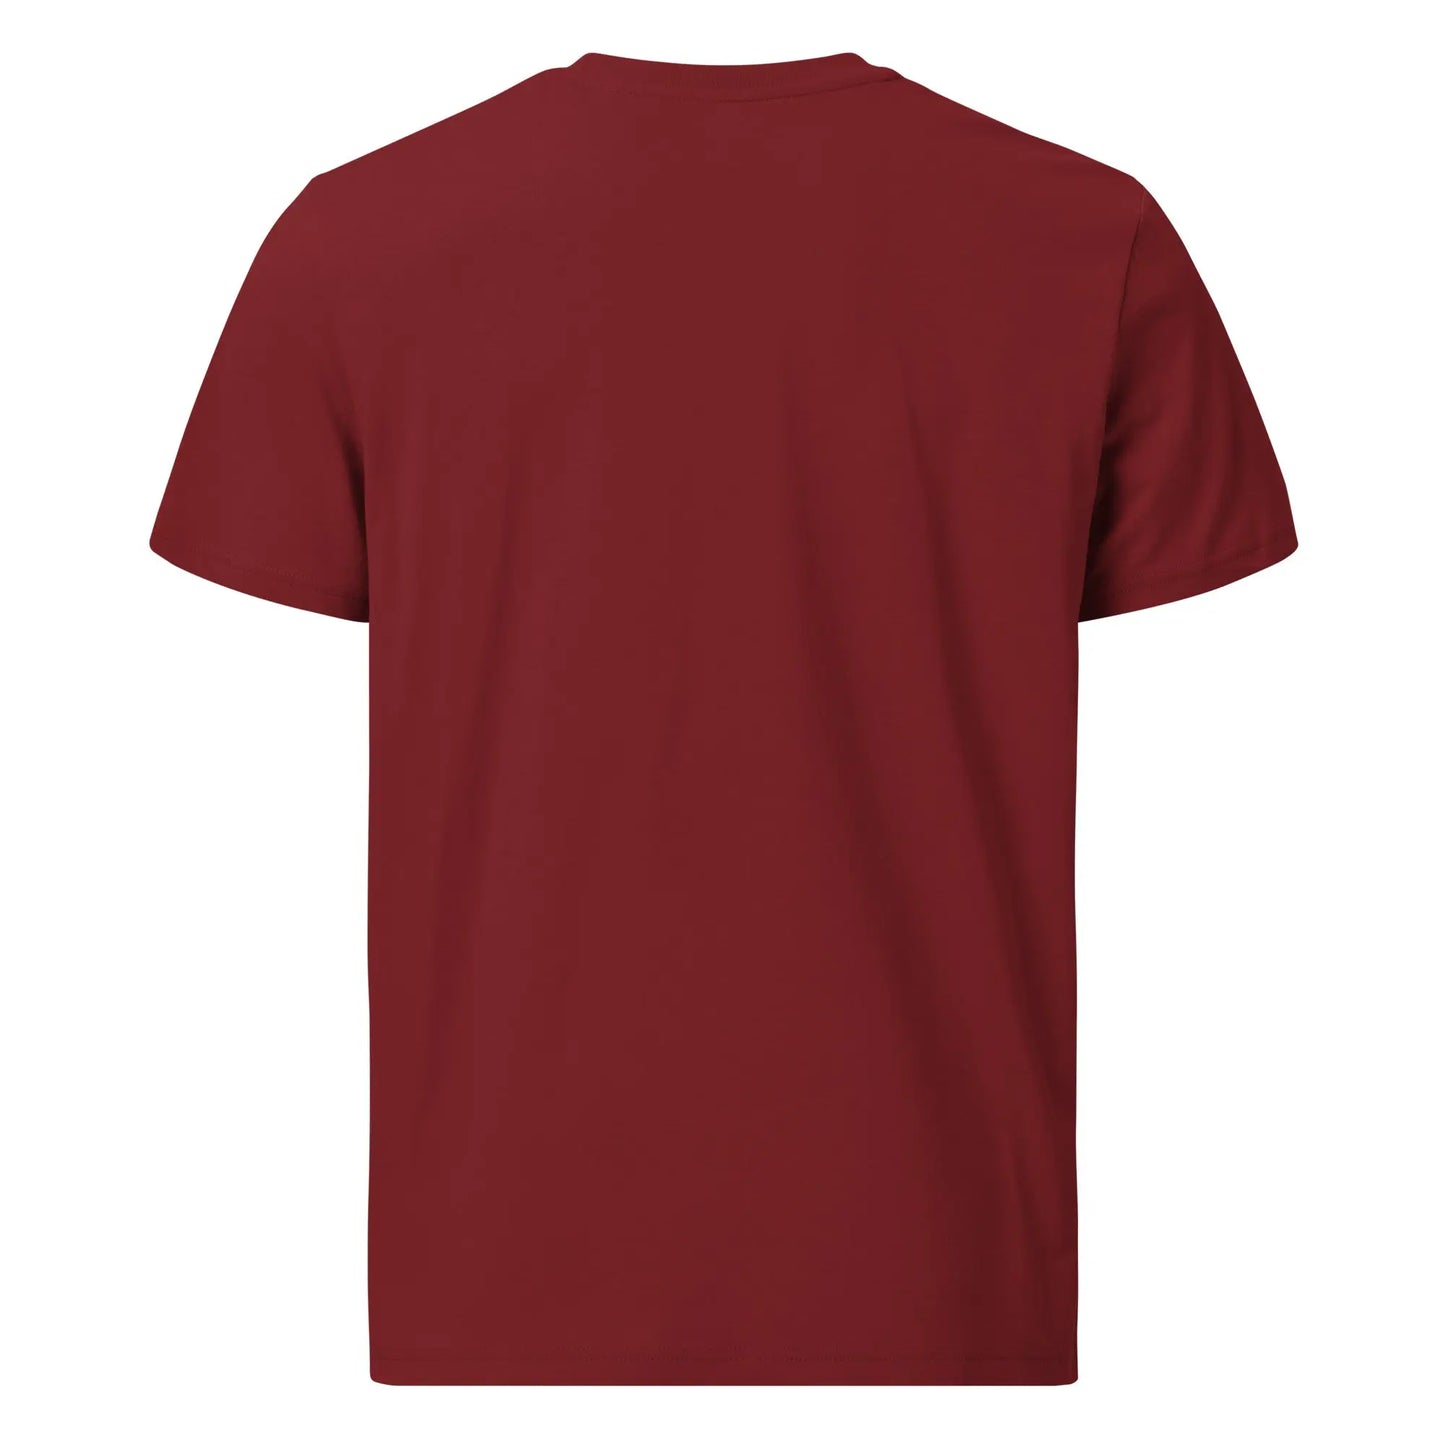 Rules Without Rulers - Premium Unisex Organic Cotton Bitcoin T-shirt Burgundy Color